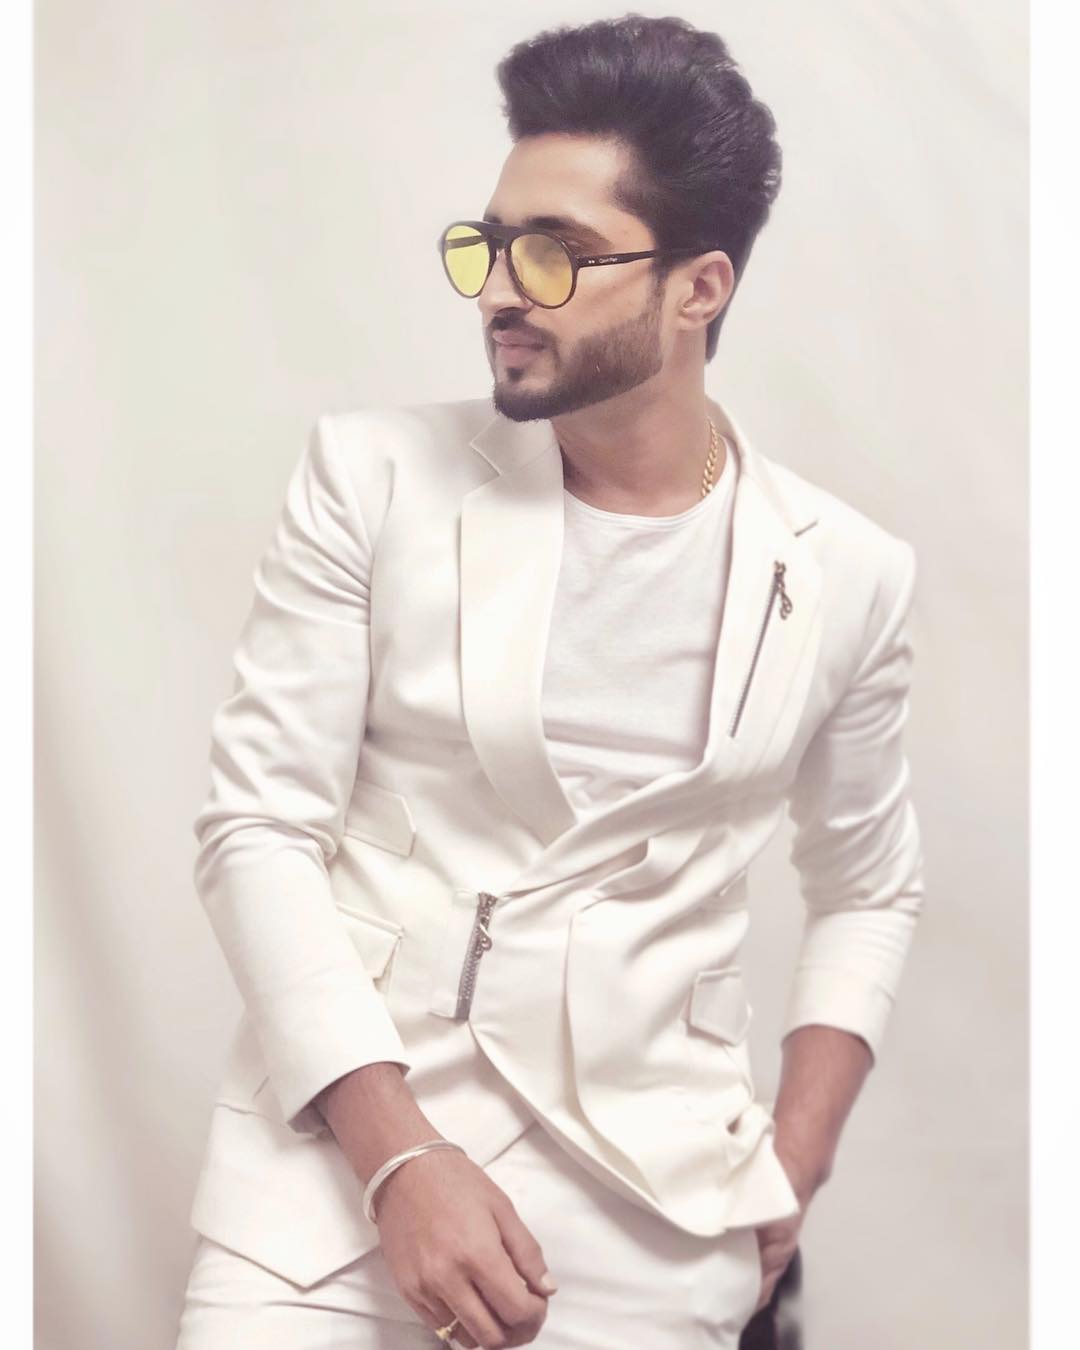 Jassi Gill HD Images, Wallpapers - Whatsapp Images